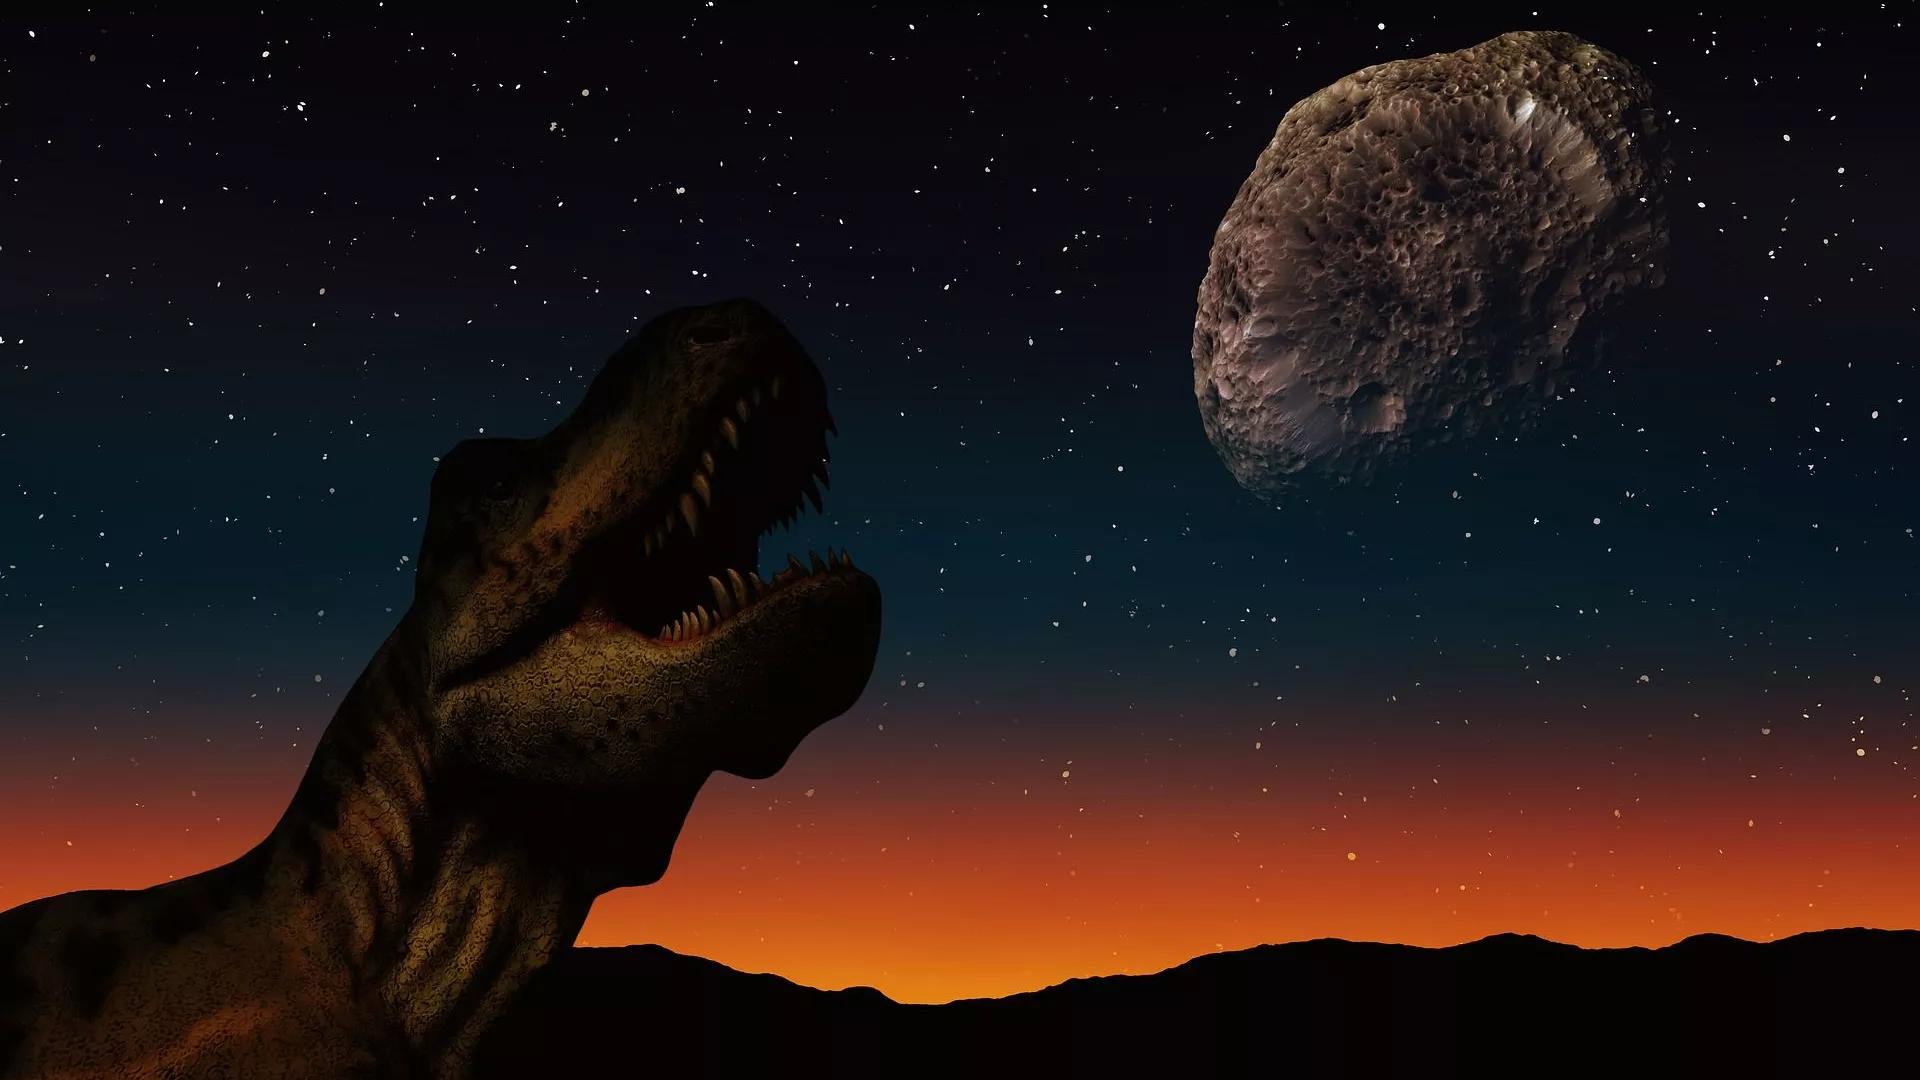 Asteroid That Killed The Dinosaurs Caused a Global Tsunami